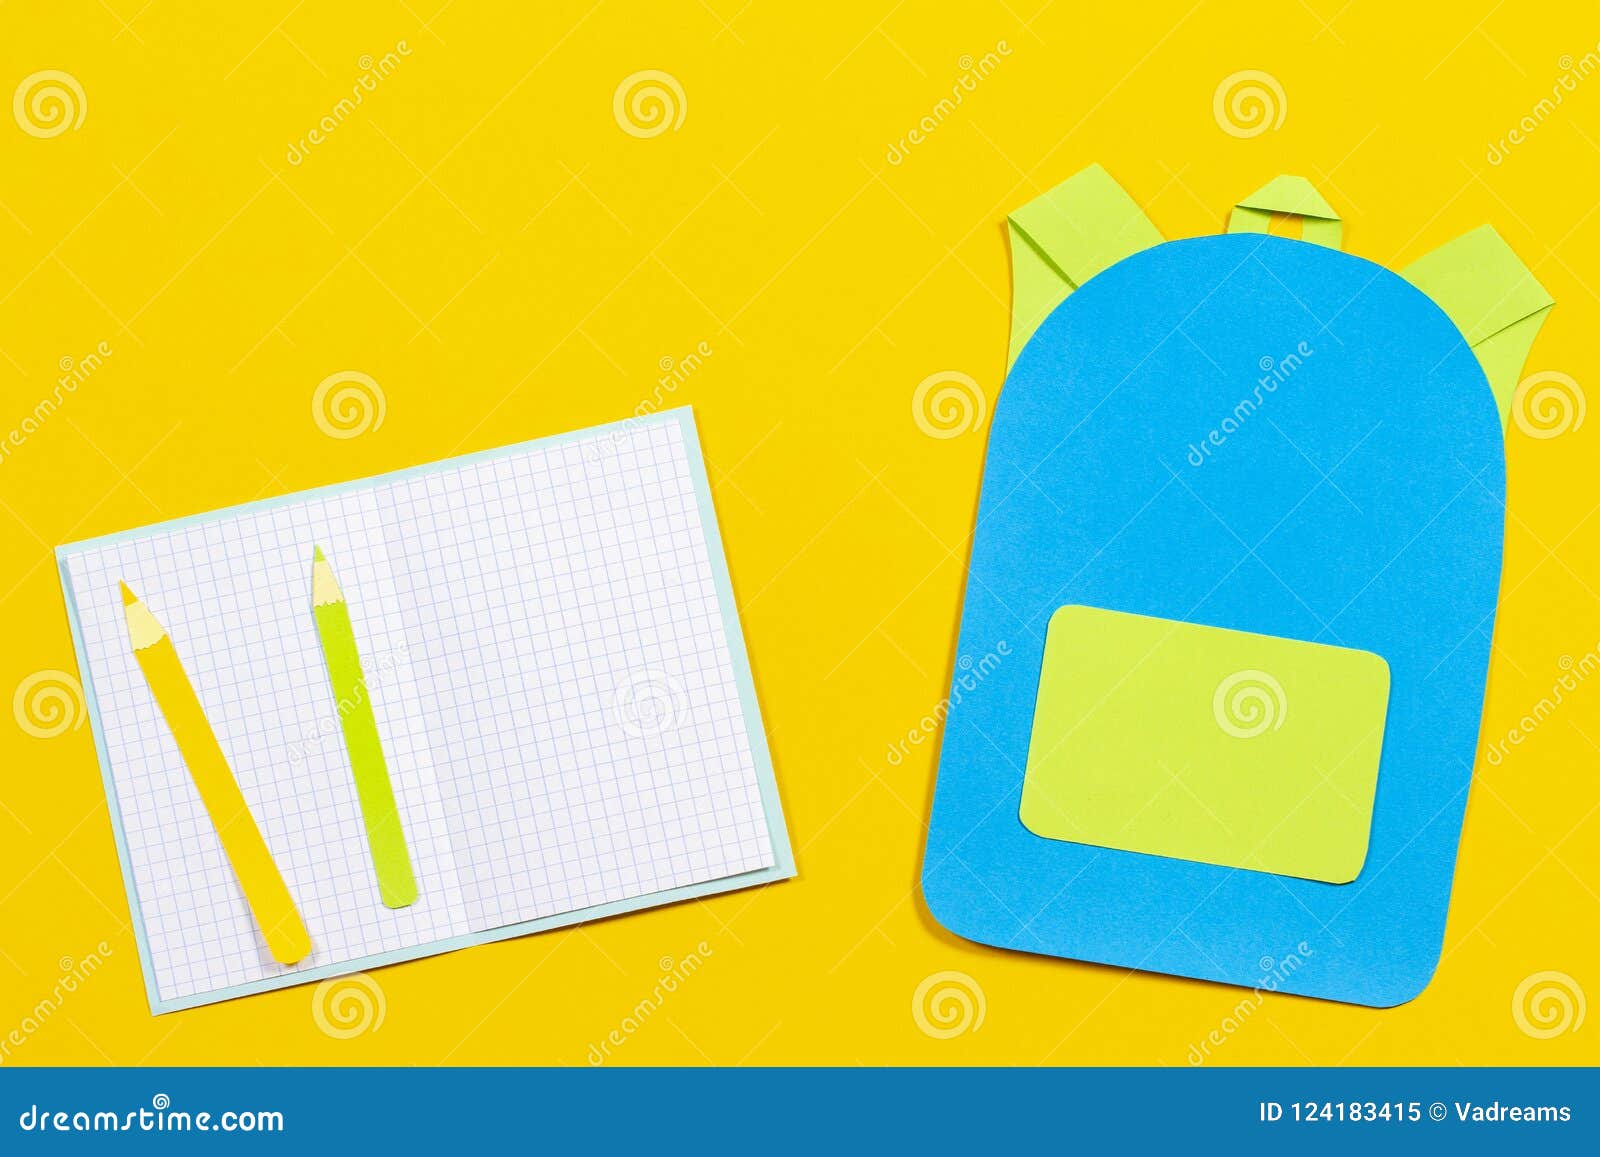 Help Your Kids Pack Their School Bags: Top Tips and PDF Checklist |  GoStudent